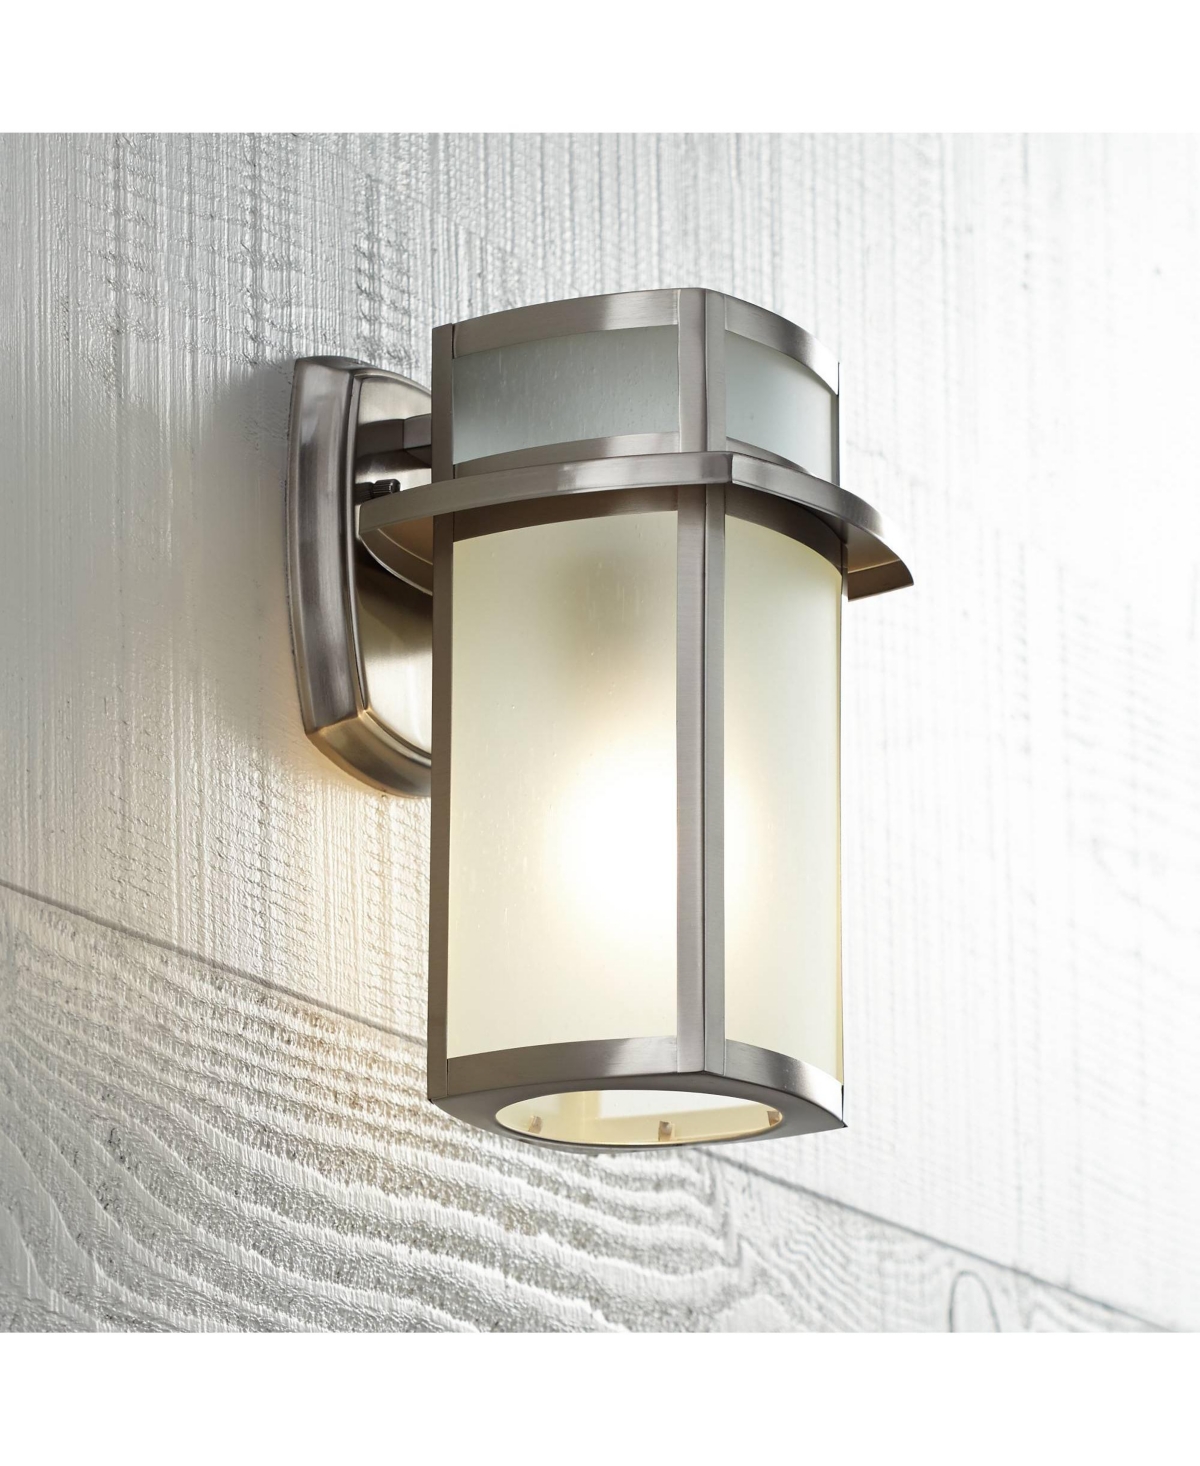 Delevan Modern Outdoor Wall Light Fixture Brushed Nickel Steel 11 1/4" Frosted Seedy Glass Damp Rated for Exterior House Porch Patio Outside Deck Gara